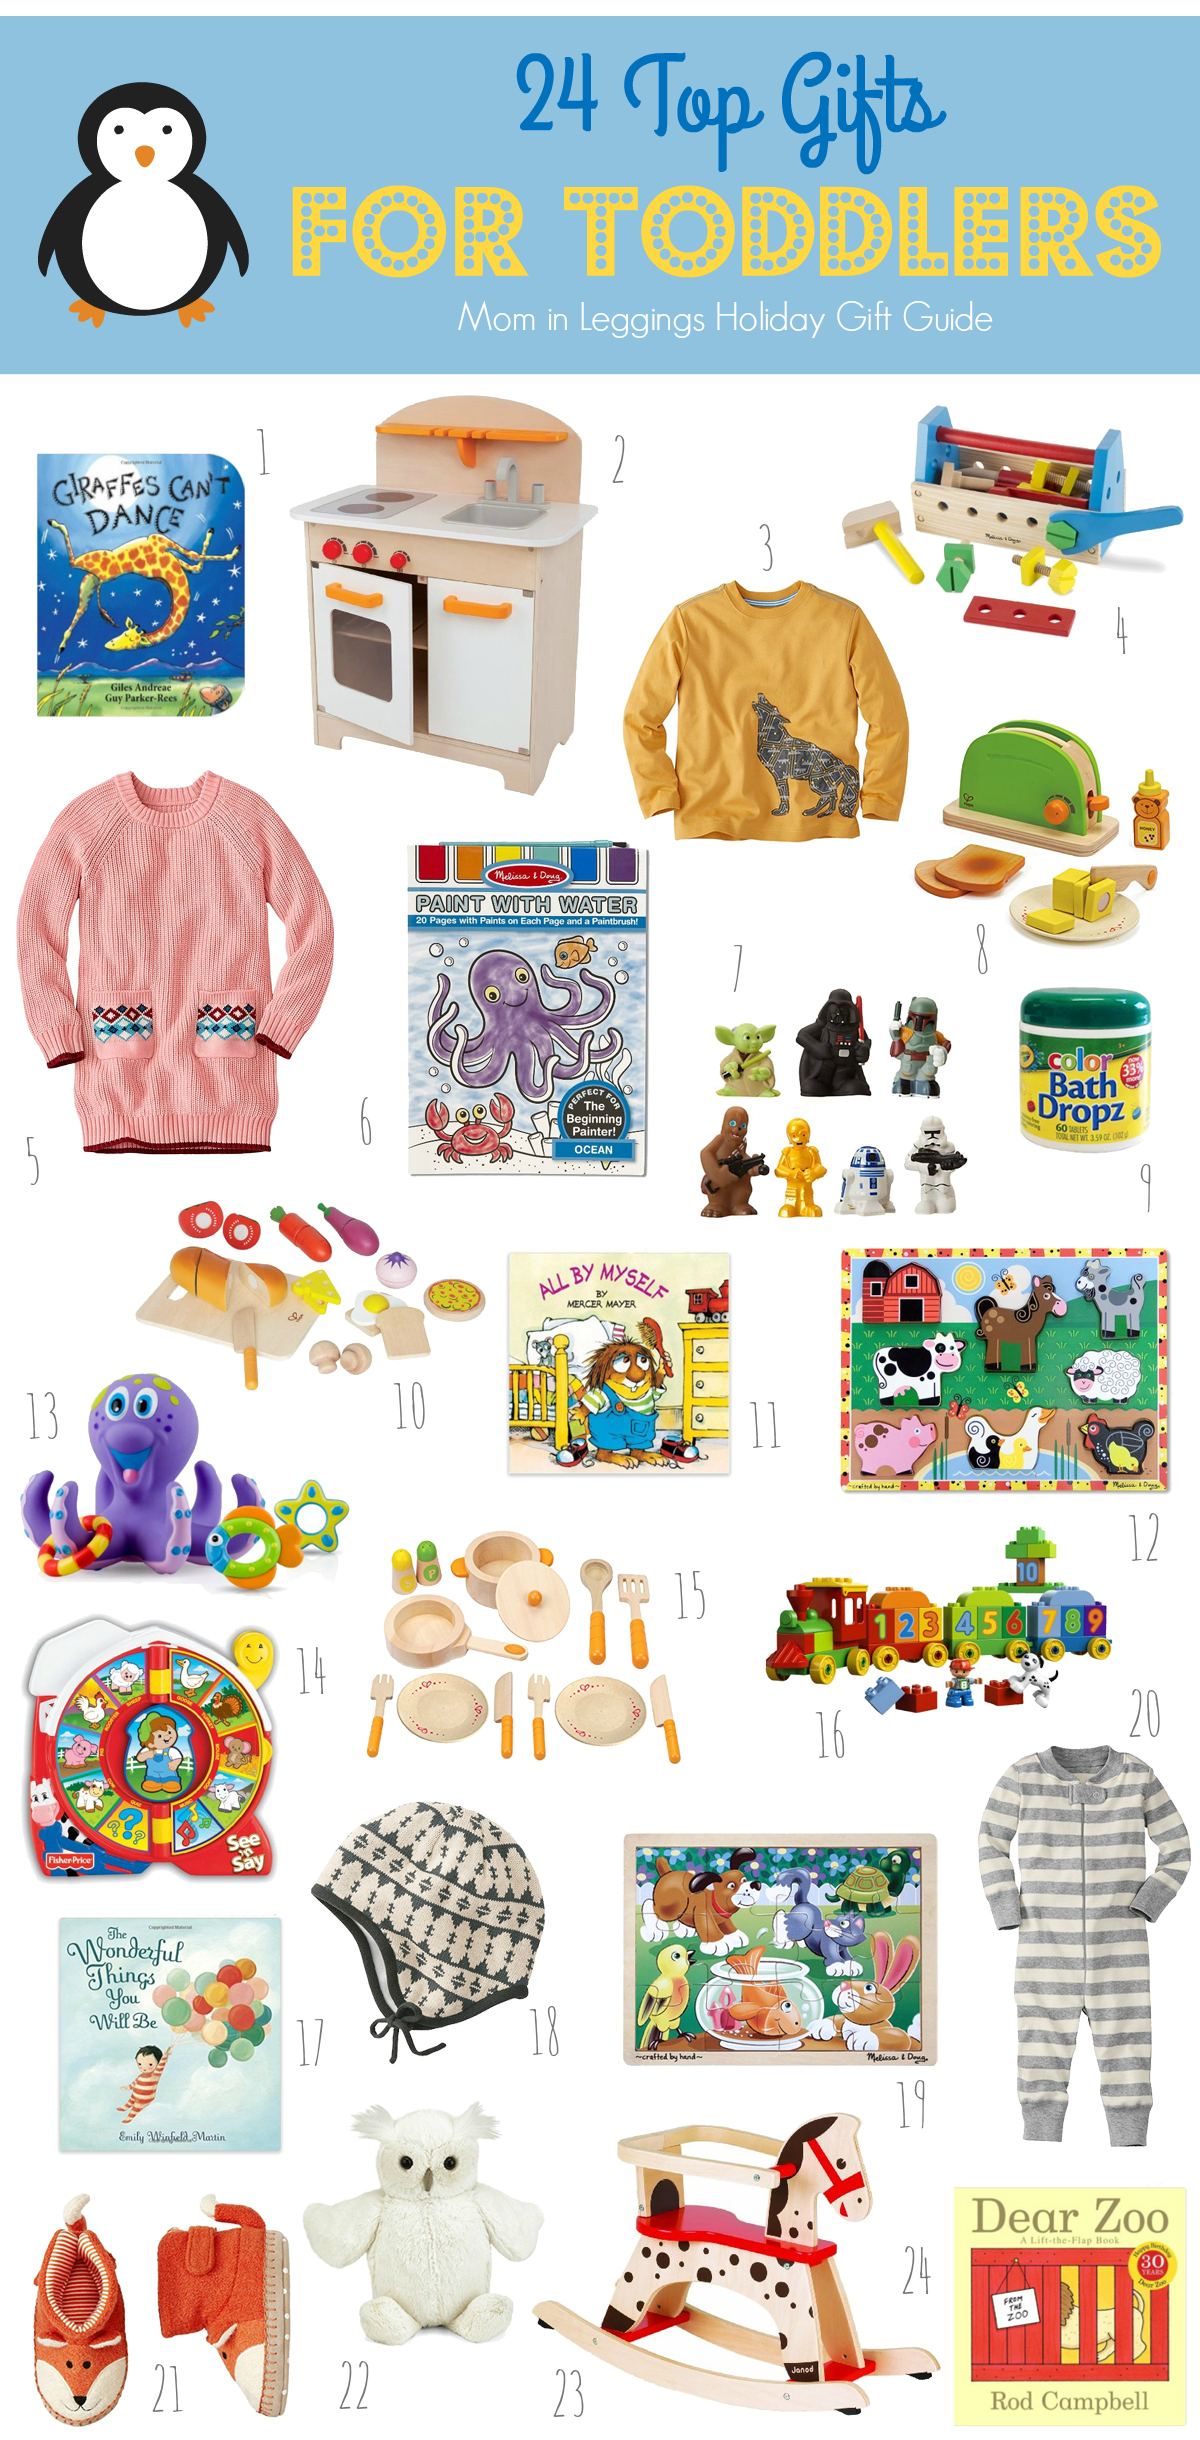 24 Top Gifts for Toddlers